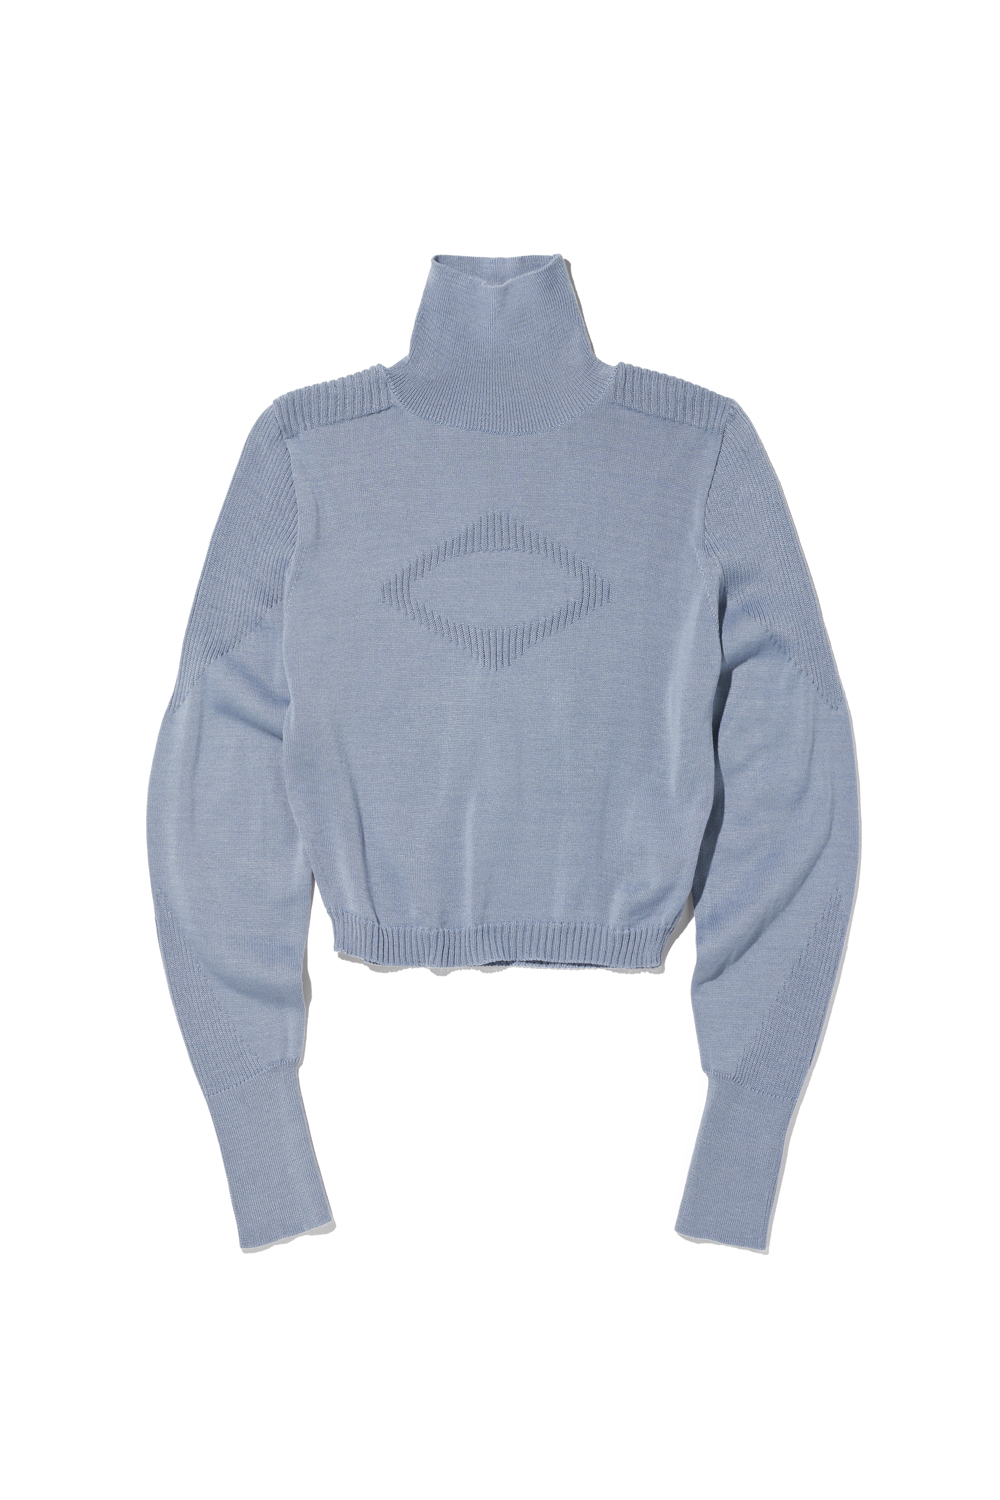 TURTLE NECK KNIT TOP_GREYISH BLUE